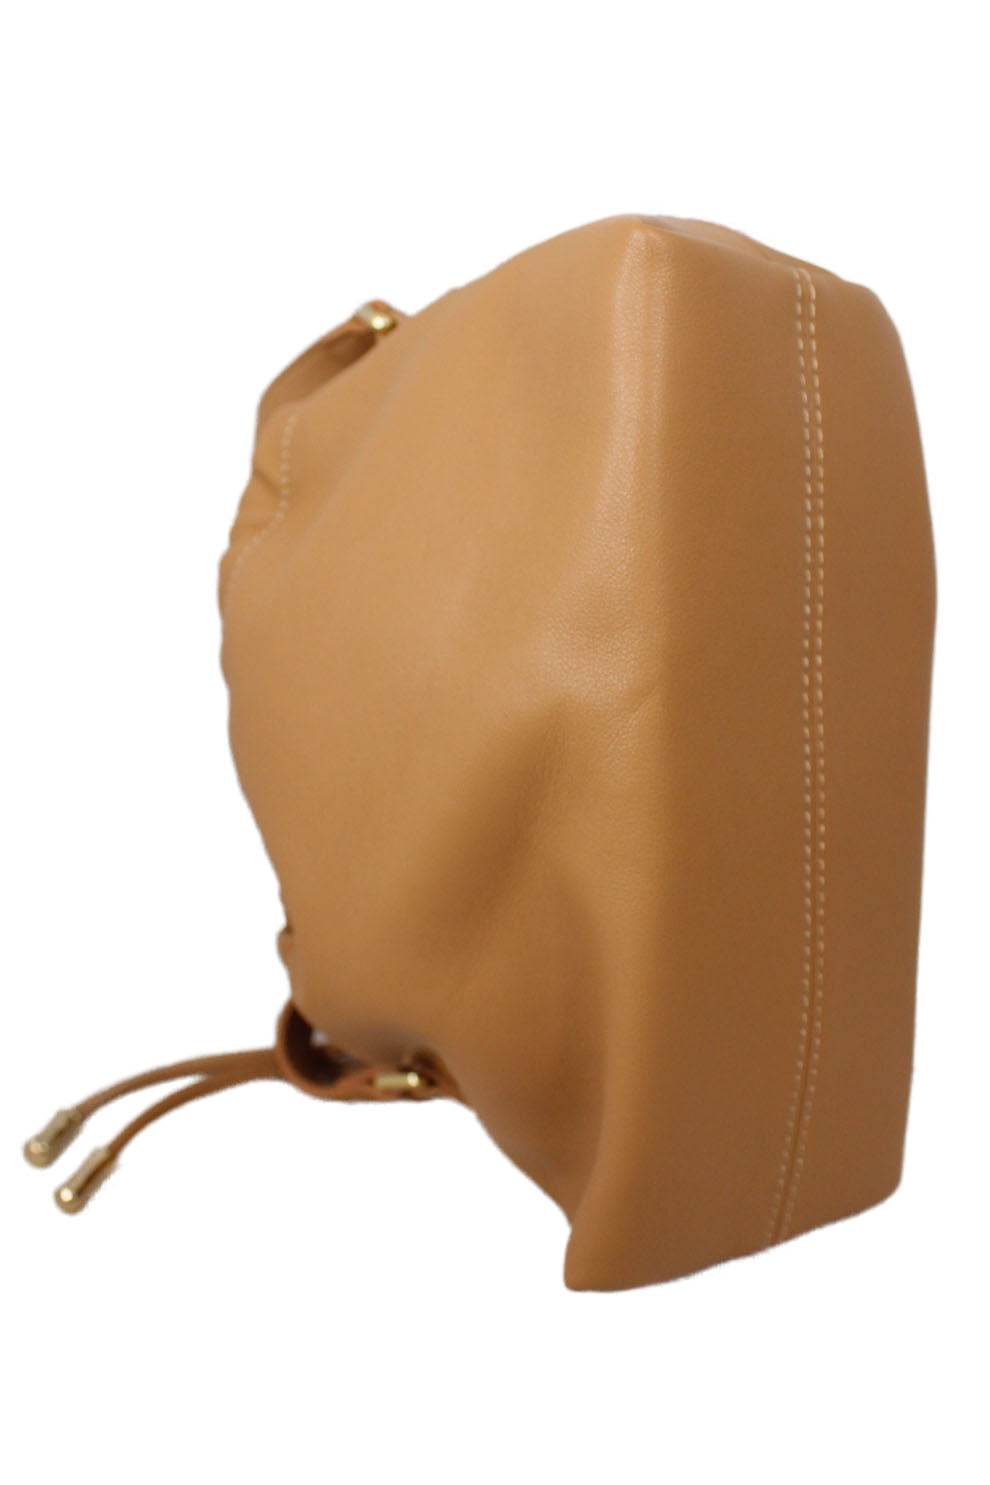 bottom view of apc ninon mini brown drawstring shoulder bag. features small drawstring bag in nut brown recycled leather-like material. grained tan faux-leather, gold tone logo stamp at face, drawstring at throat, magnetic closure, patch pocket at interior, and twill lining